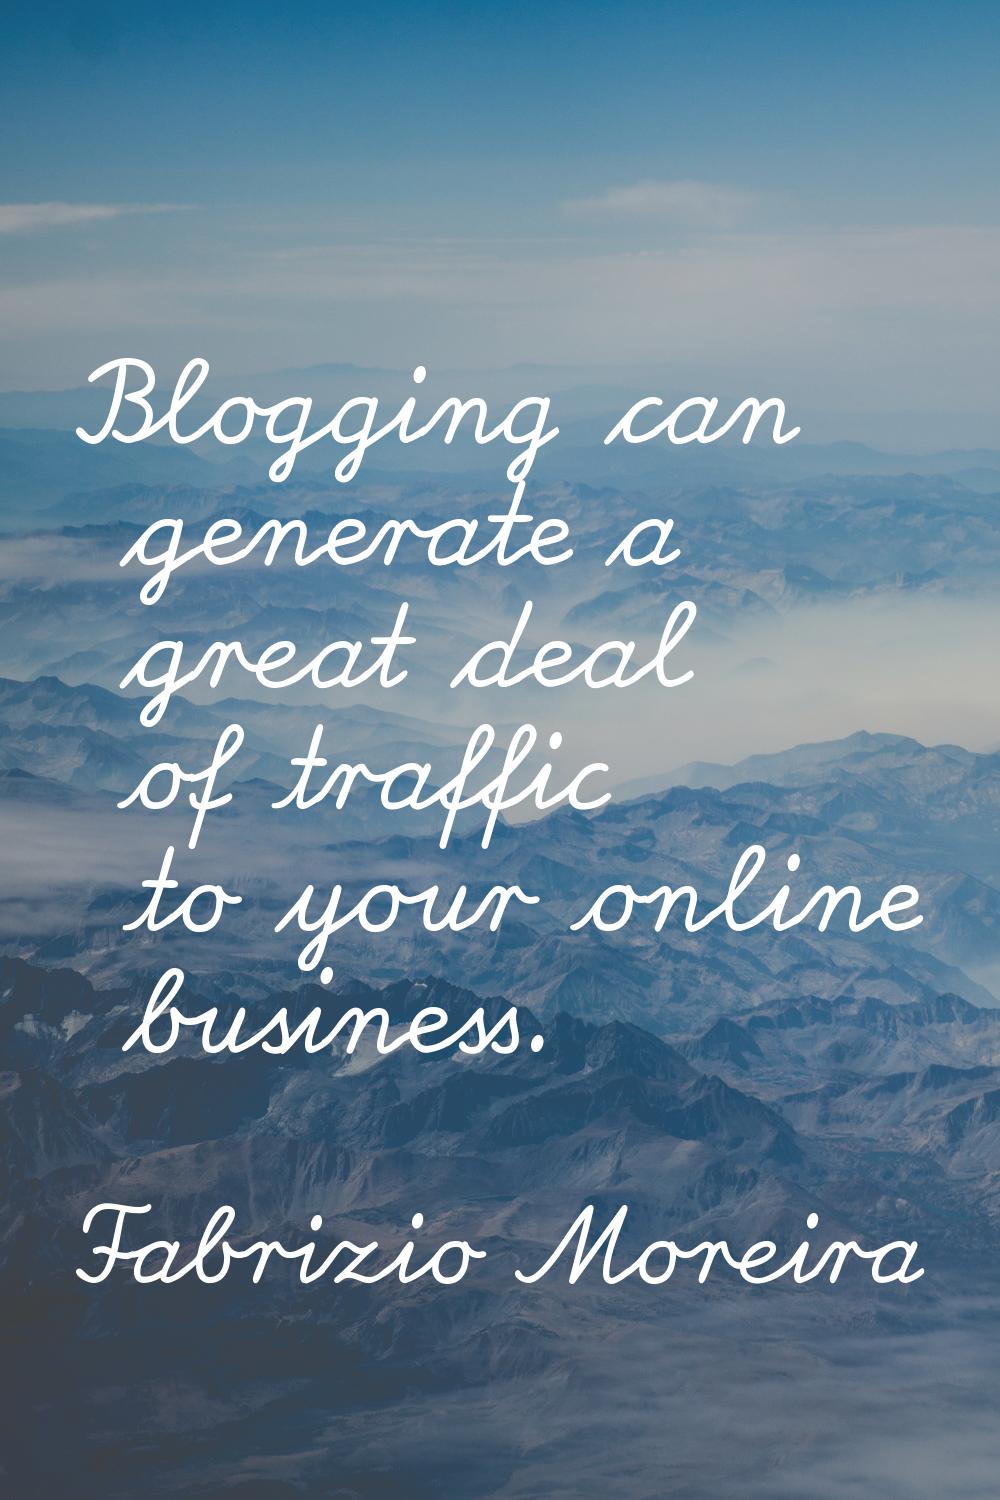 Blogging can generate a great deal of traffic to your online business.